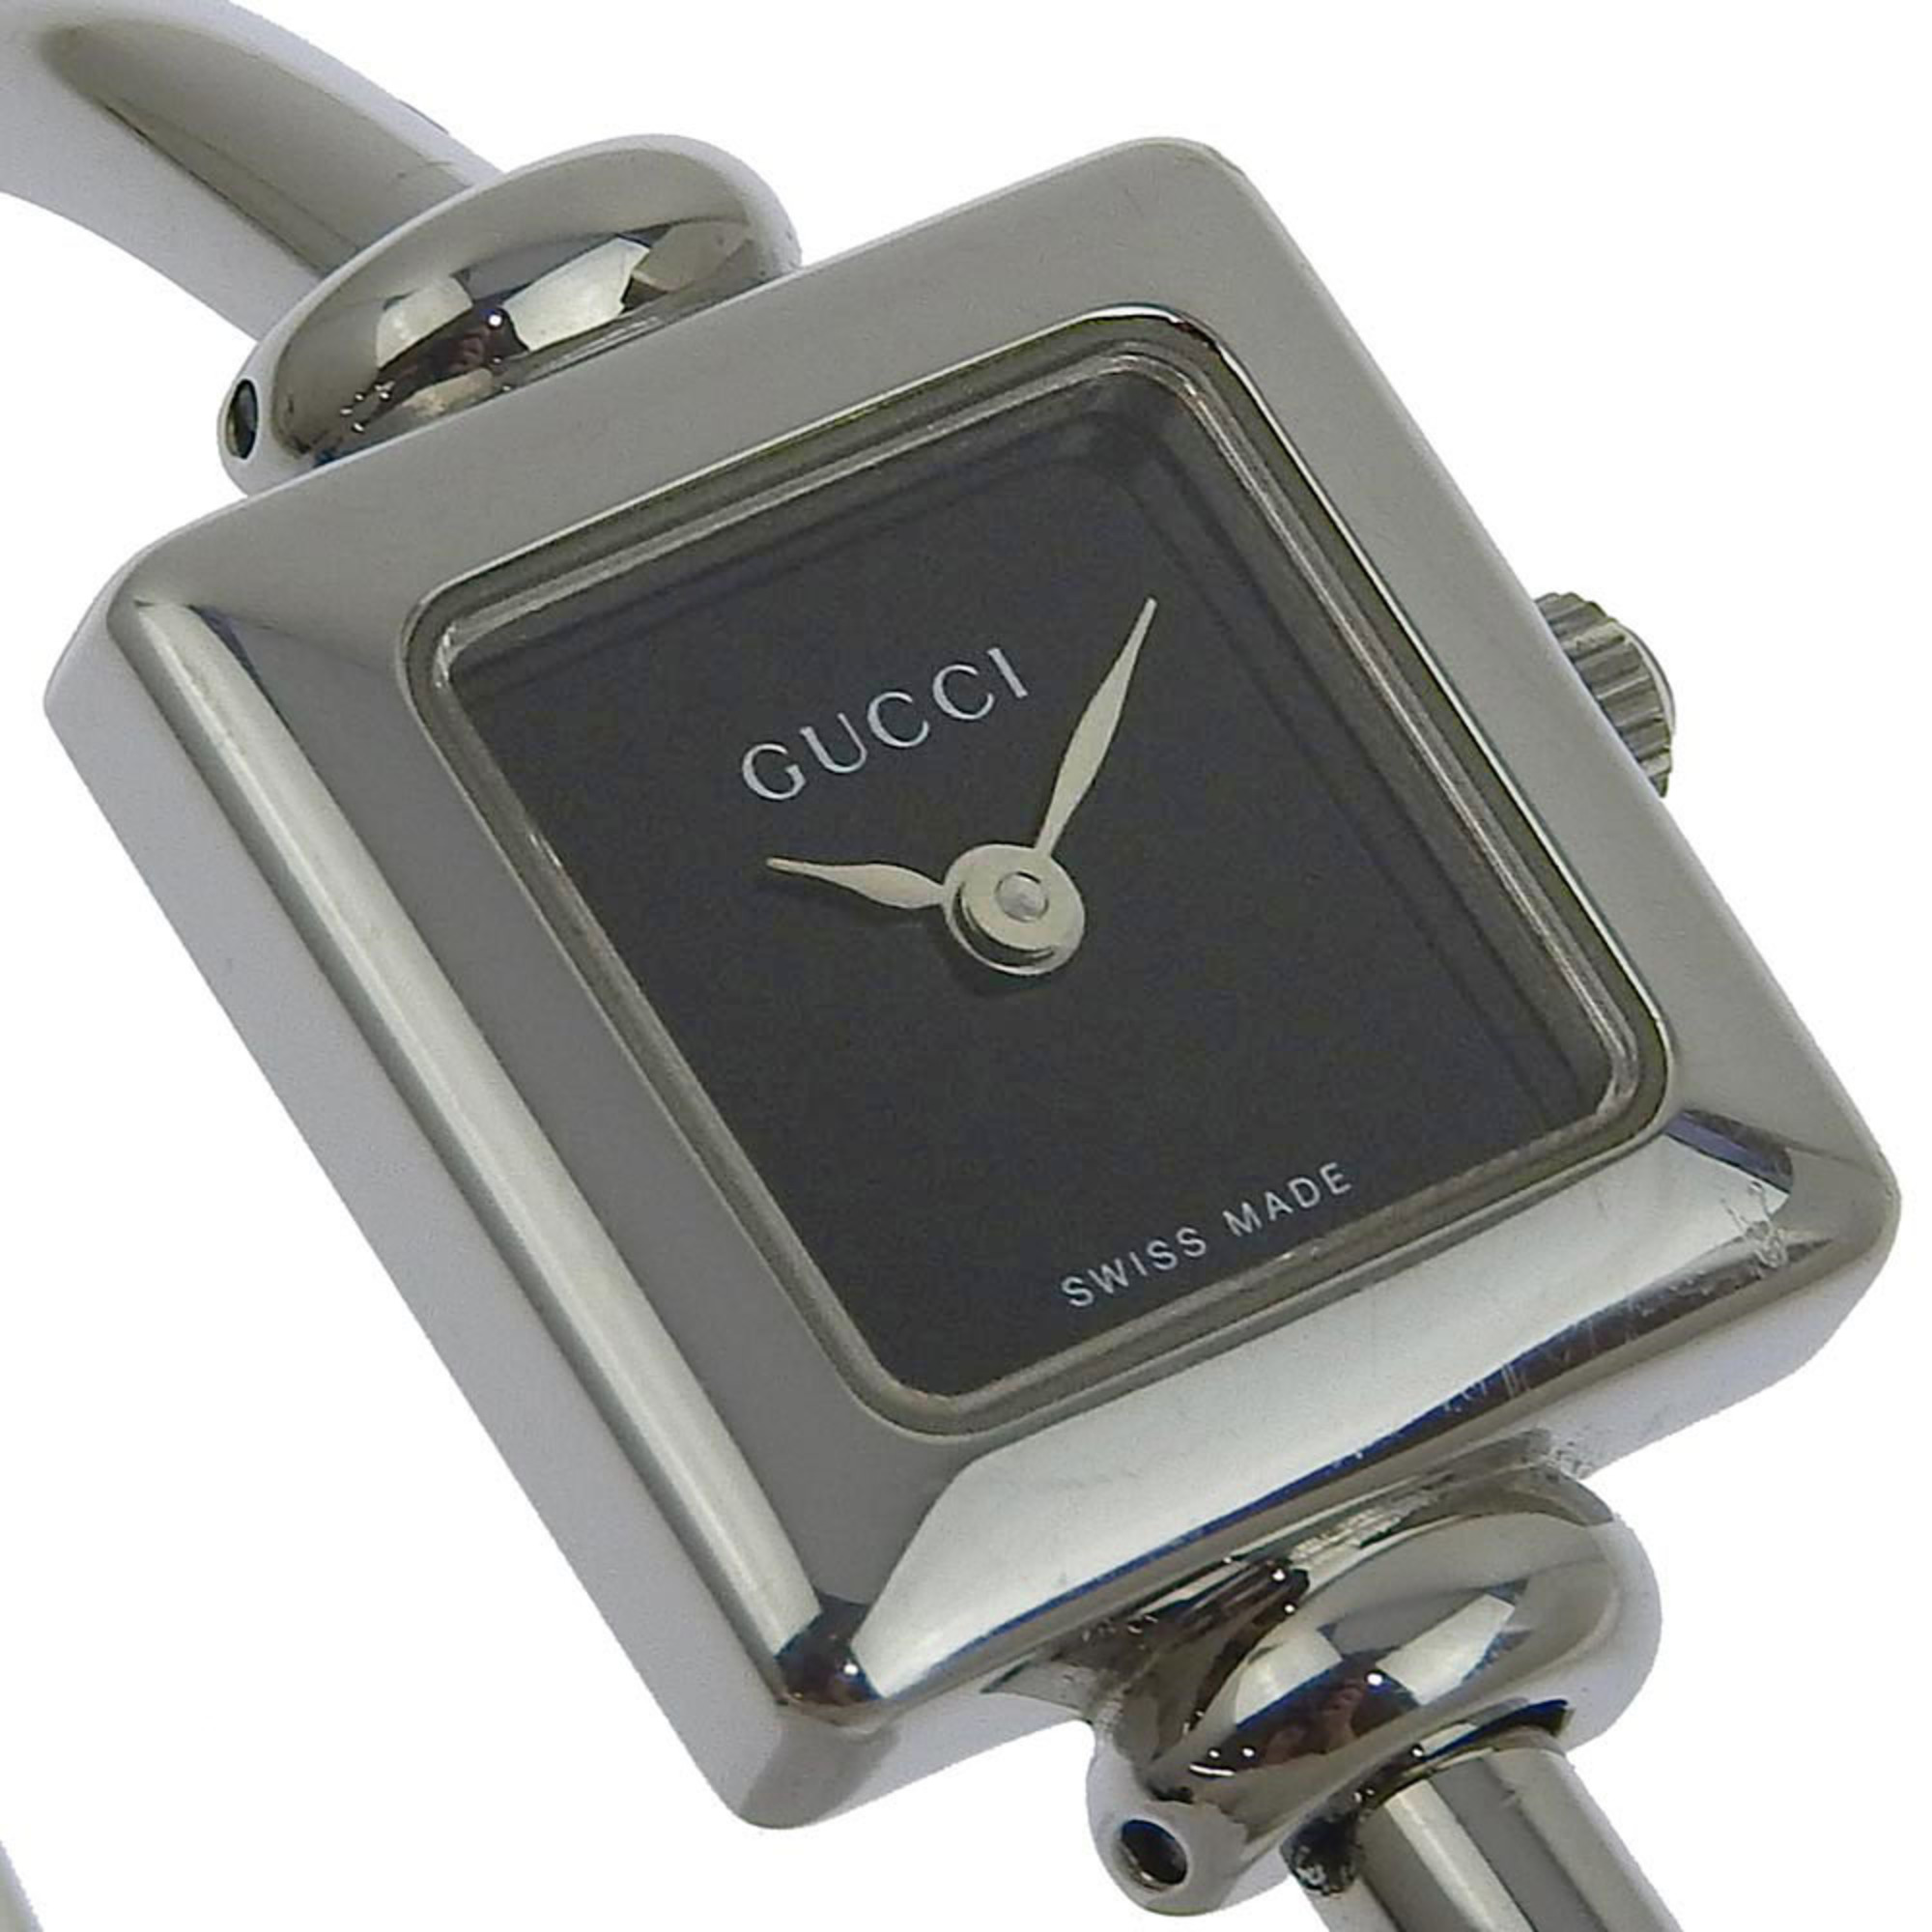 GUCCI Gucci watch 1900L stainless steel silver quartz analog display ladies black dial